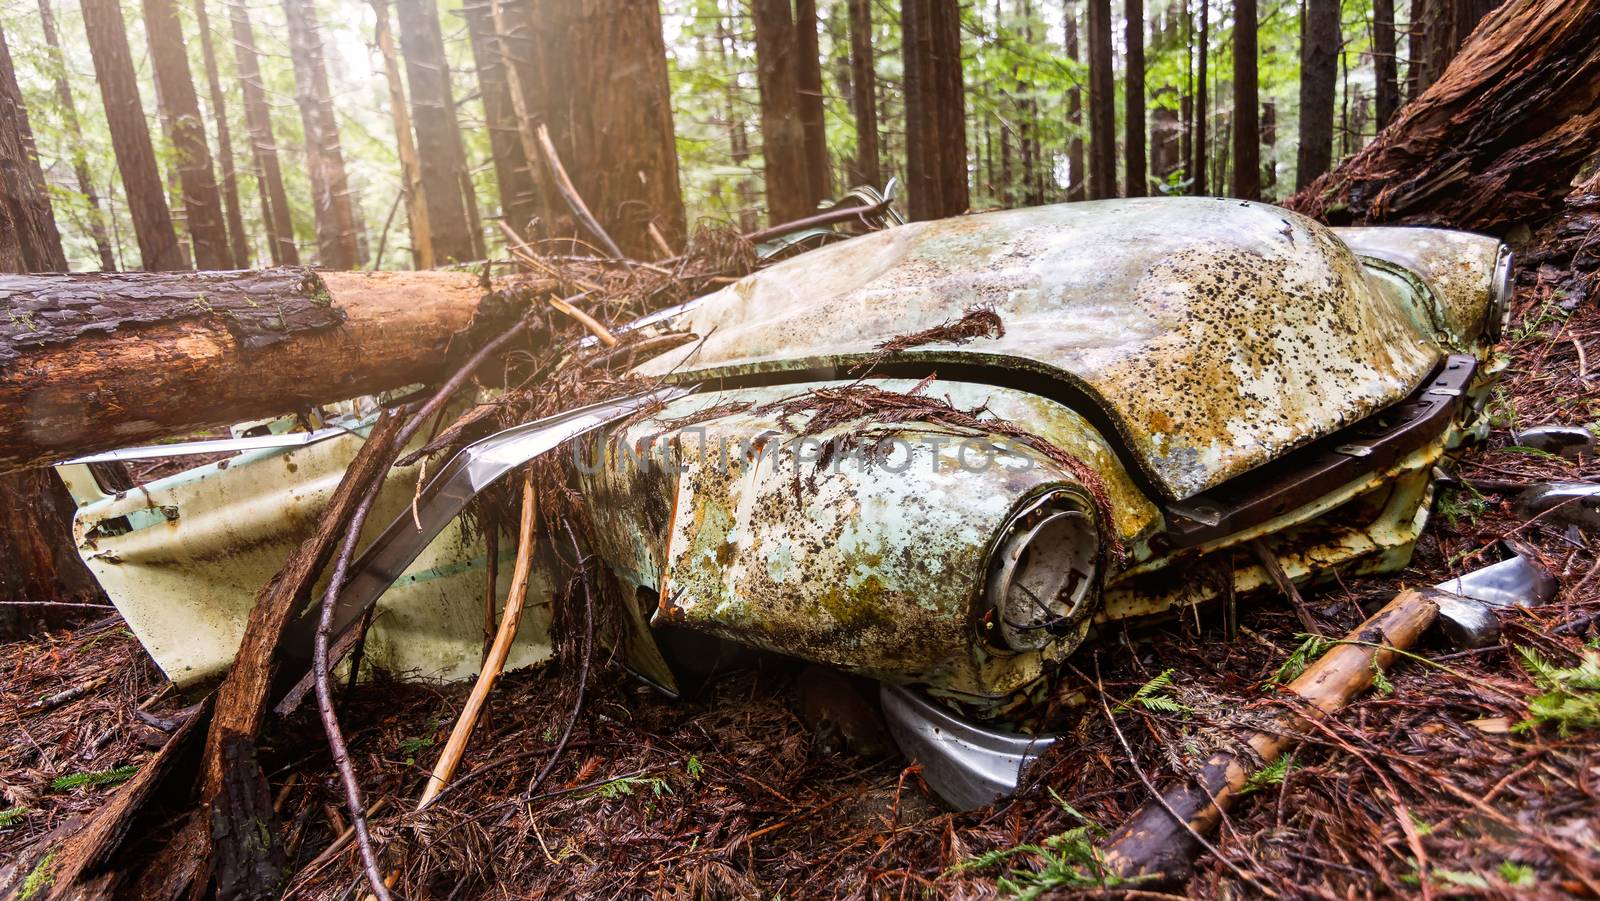 An abandoned classic vehicle rusts in a Northern California forest.